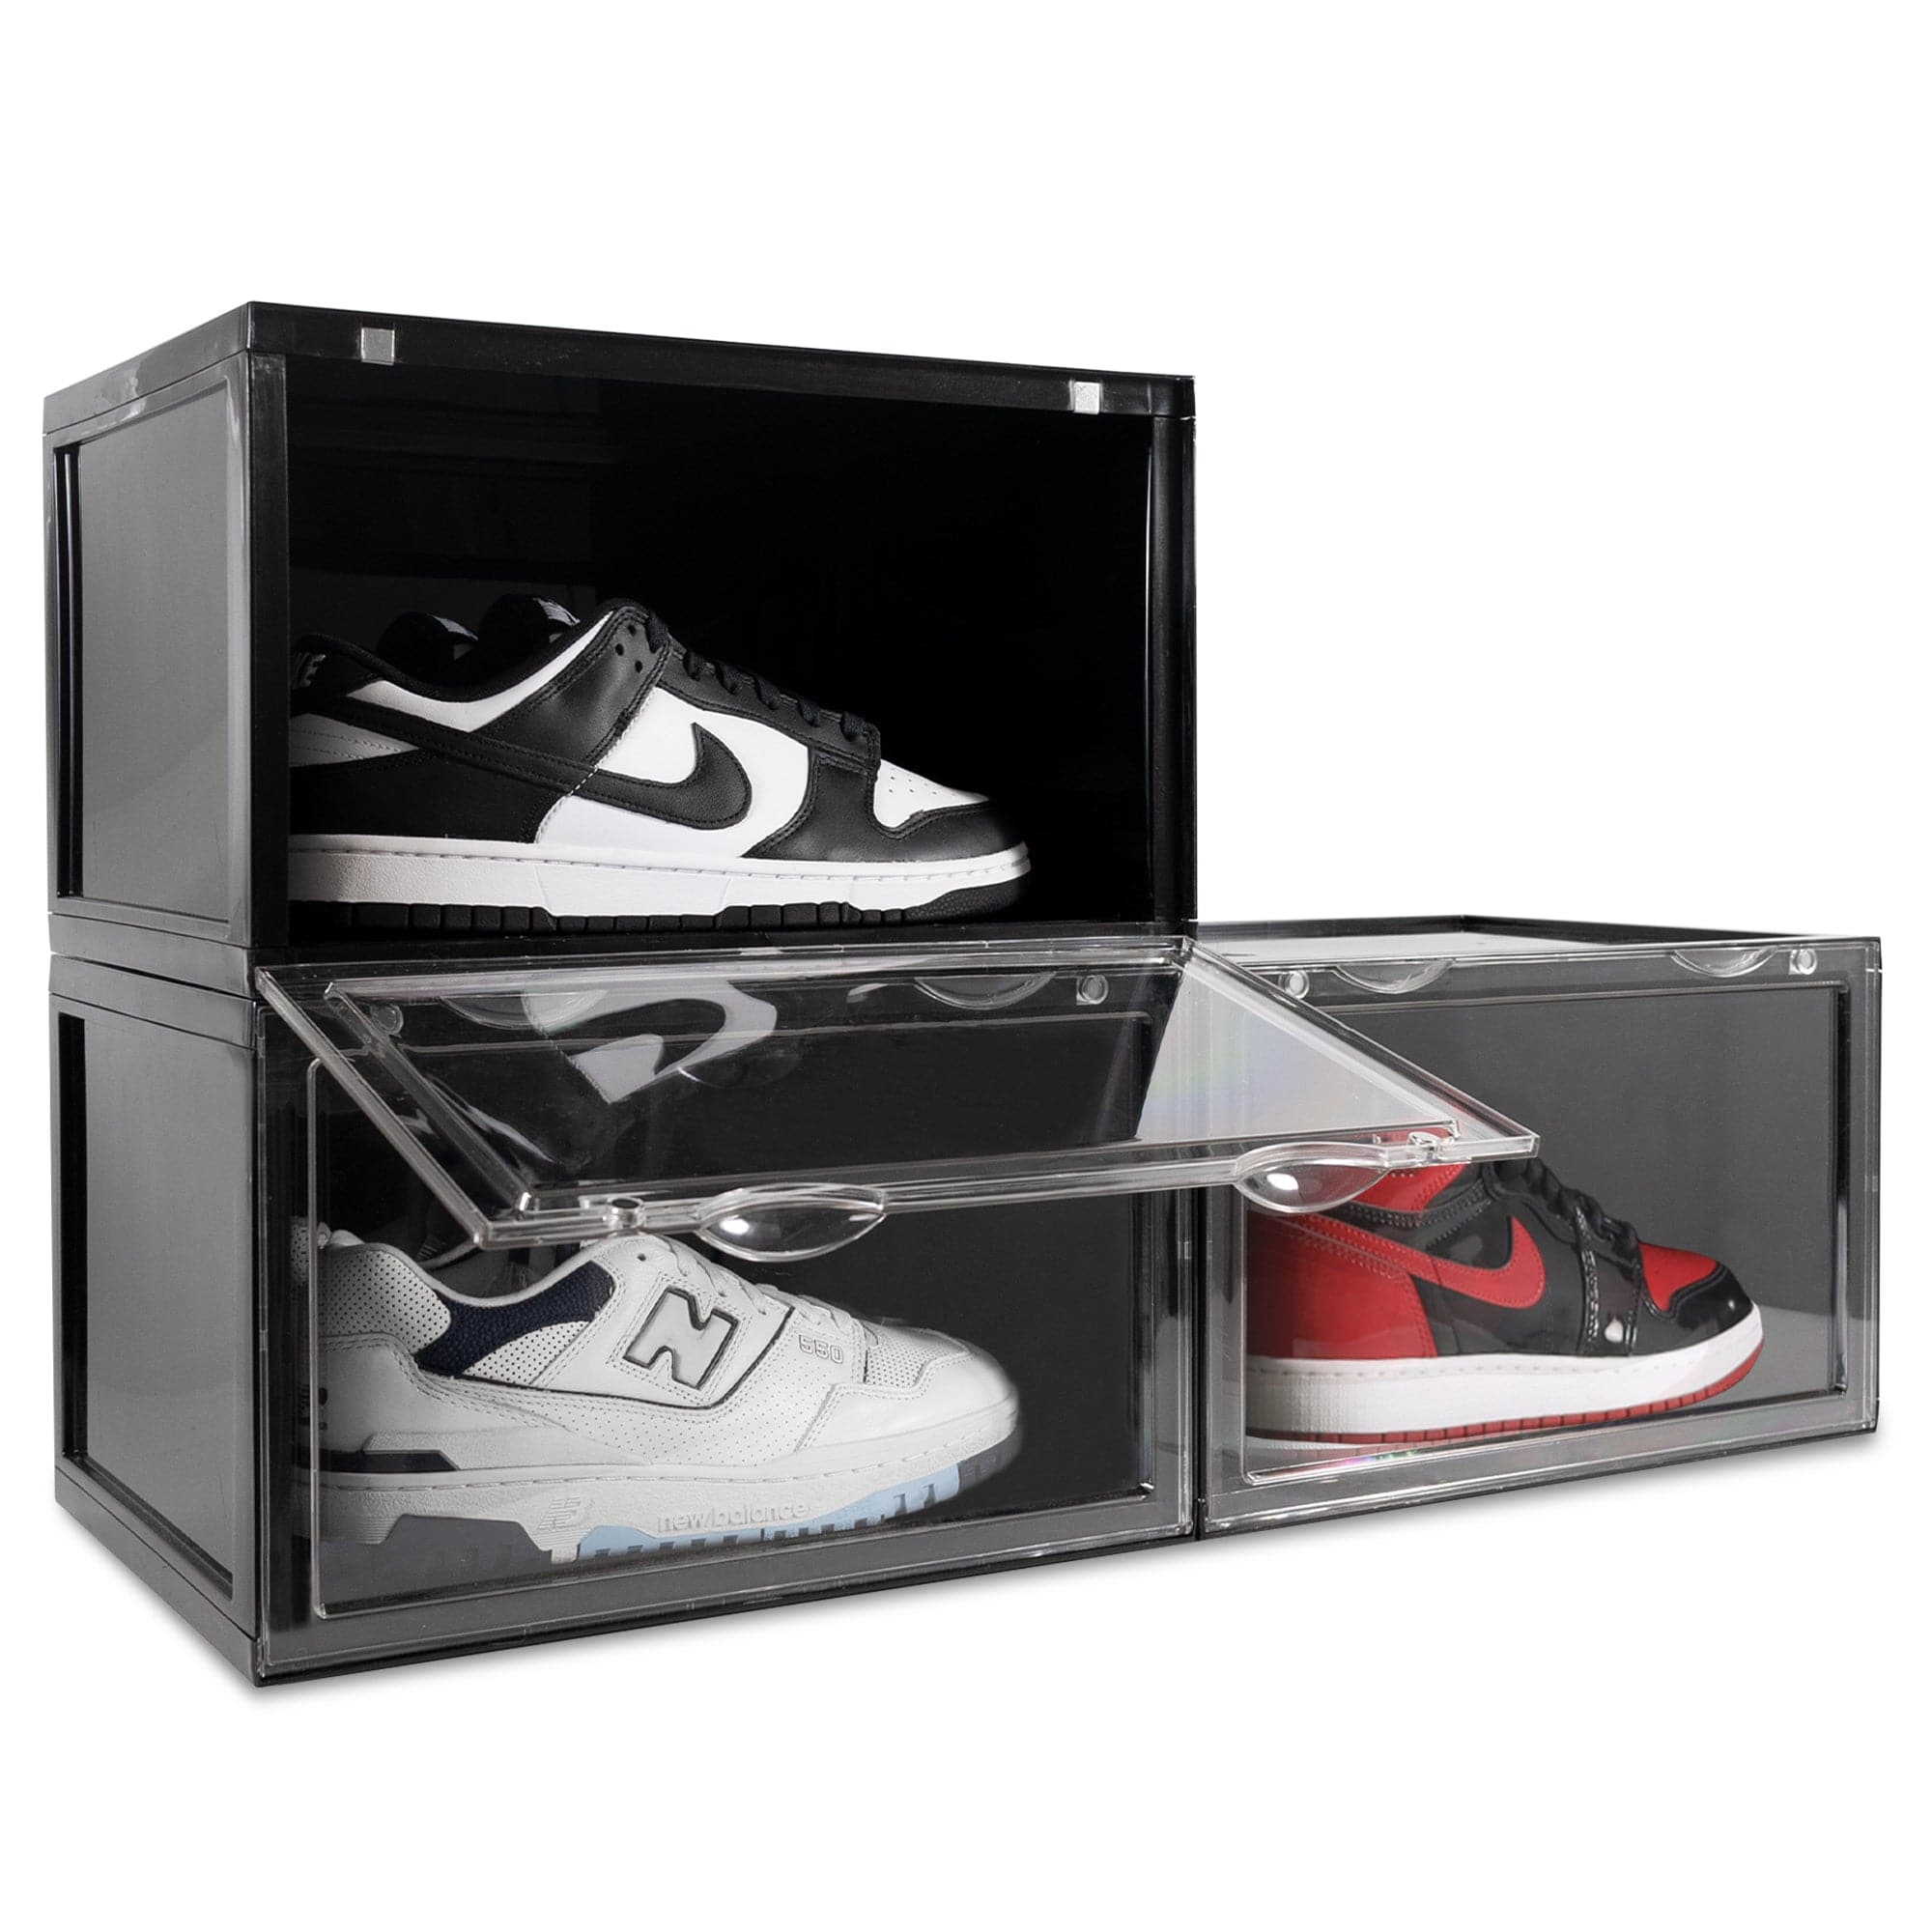 Ollie's Stackable Shoe Boxes: Best for Organizing and Storing Shoes –